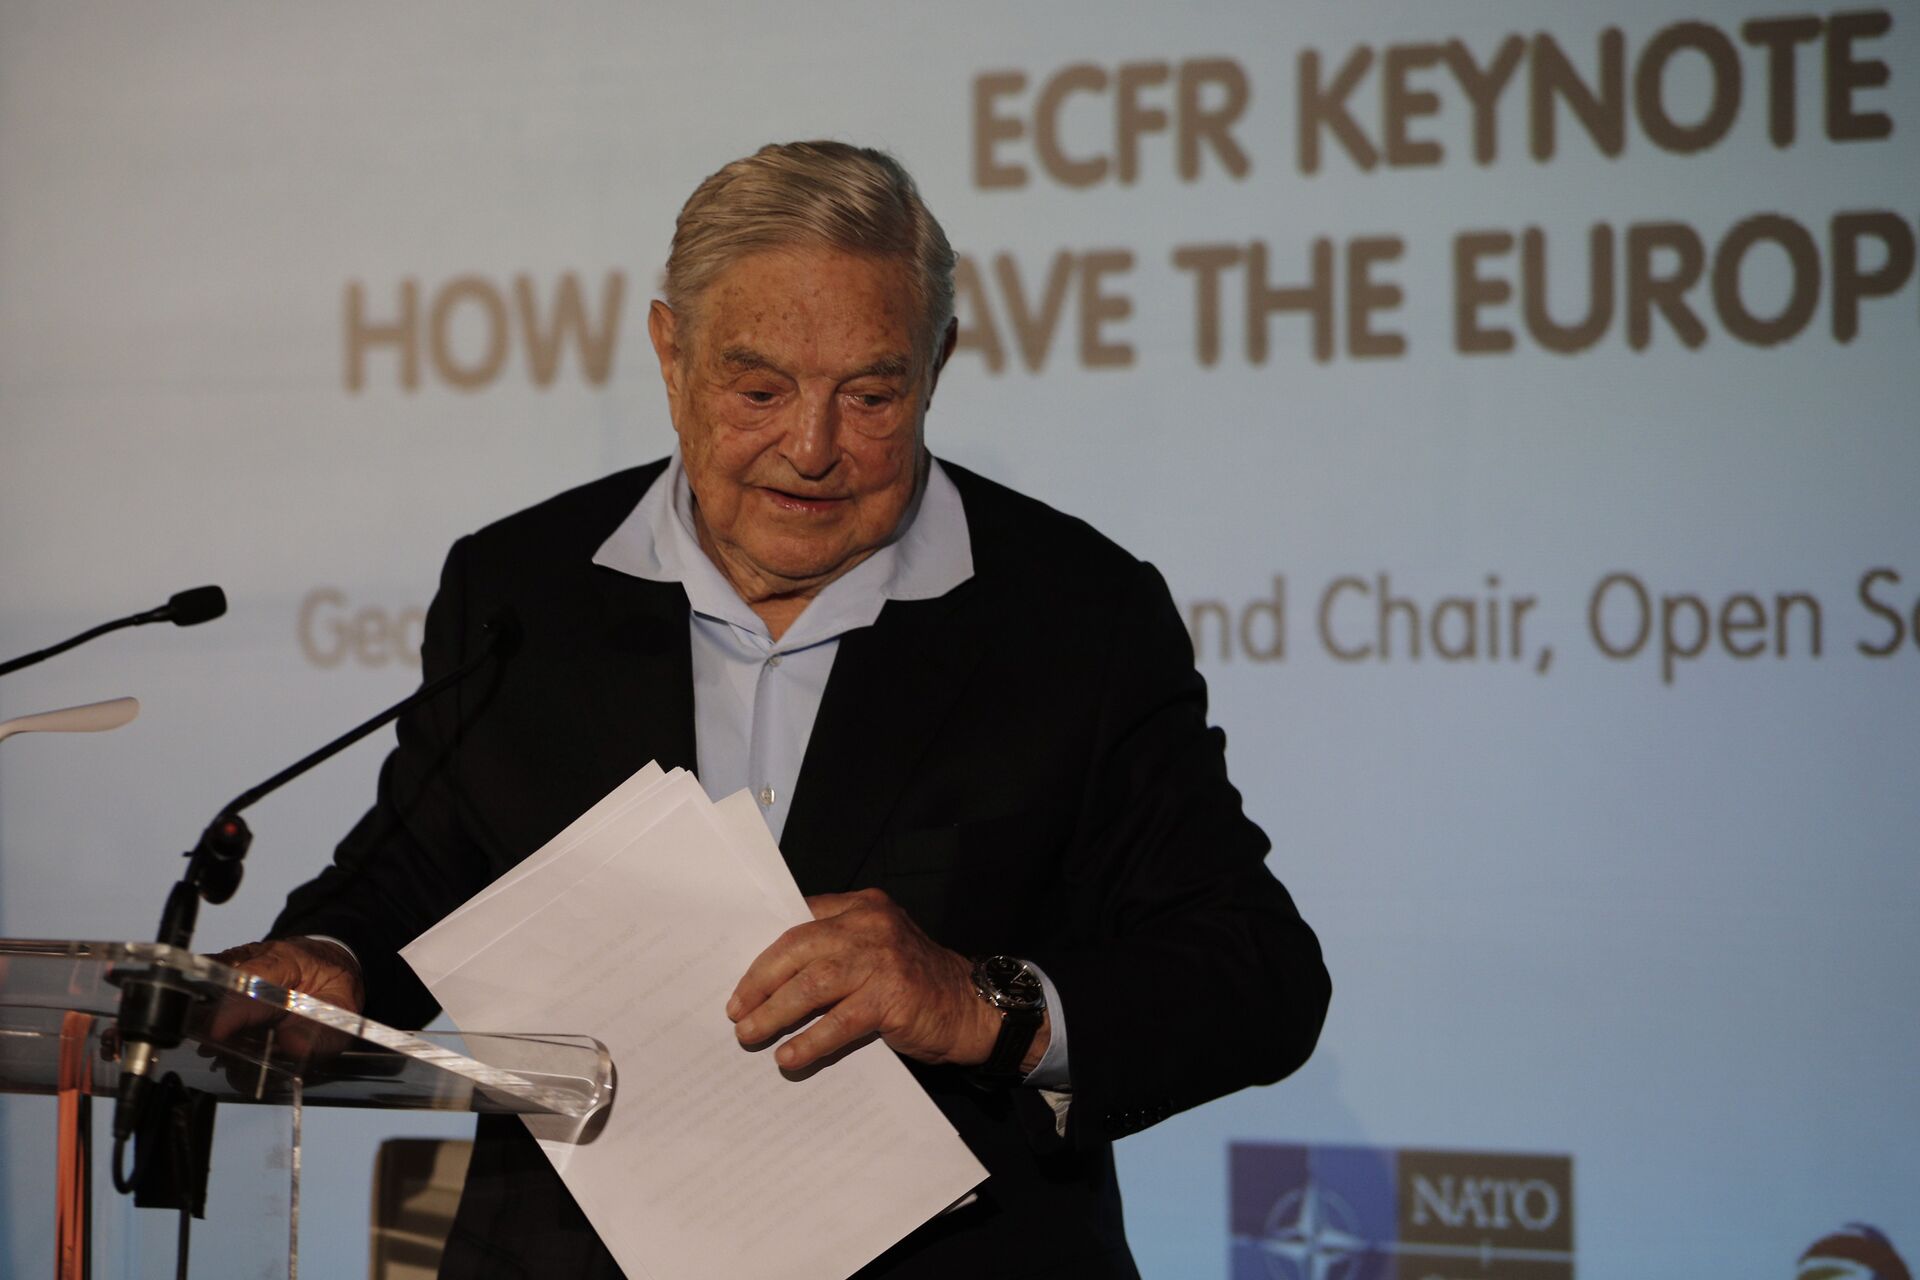 George Soros, Founder and Chairman of the Open Society Foundations leaves after his speech entitled How to save the European Union as he attends the European Council On Foreign Relations Annual Council Meeting in Paris, Tuesday, May 29, 2018 - Sputnik International, 1920, 09.12.2021